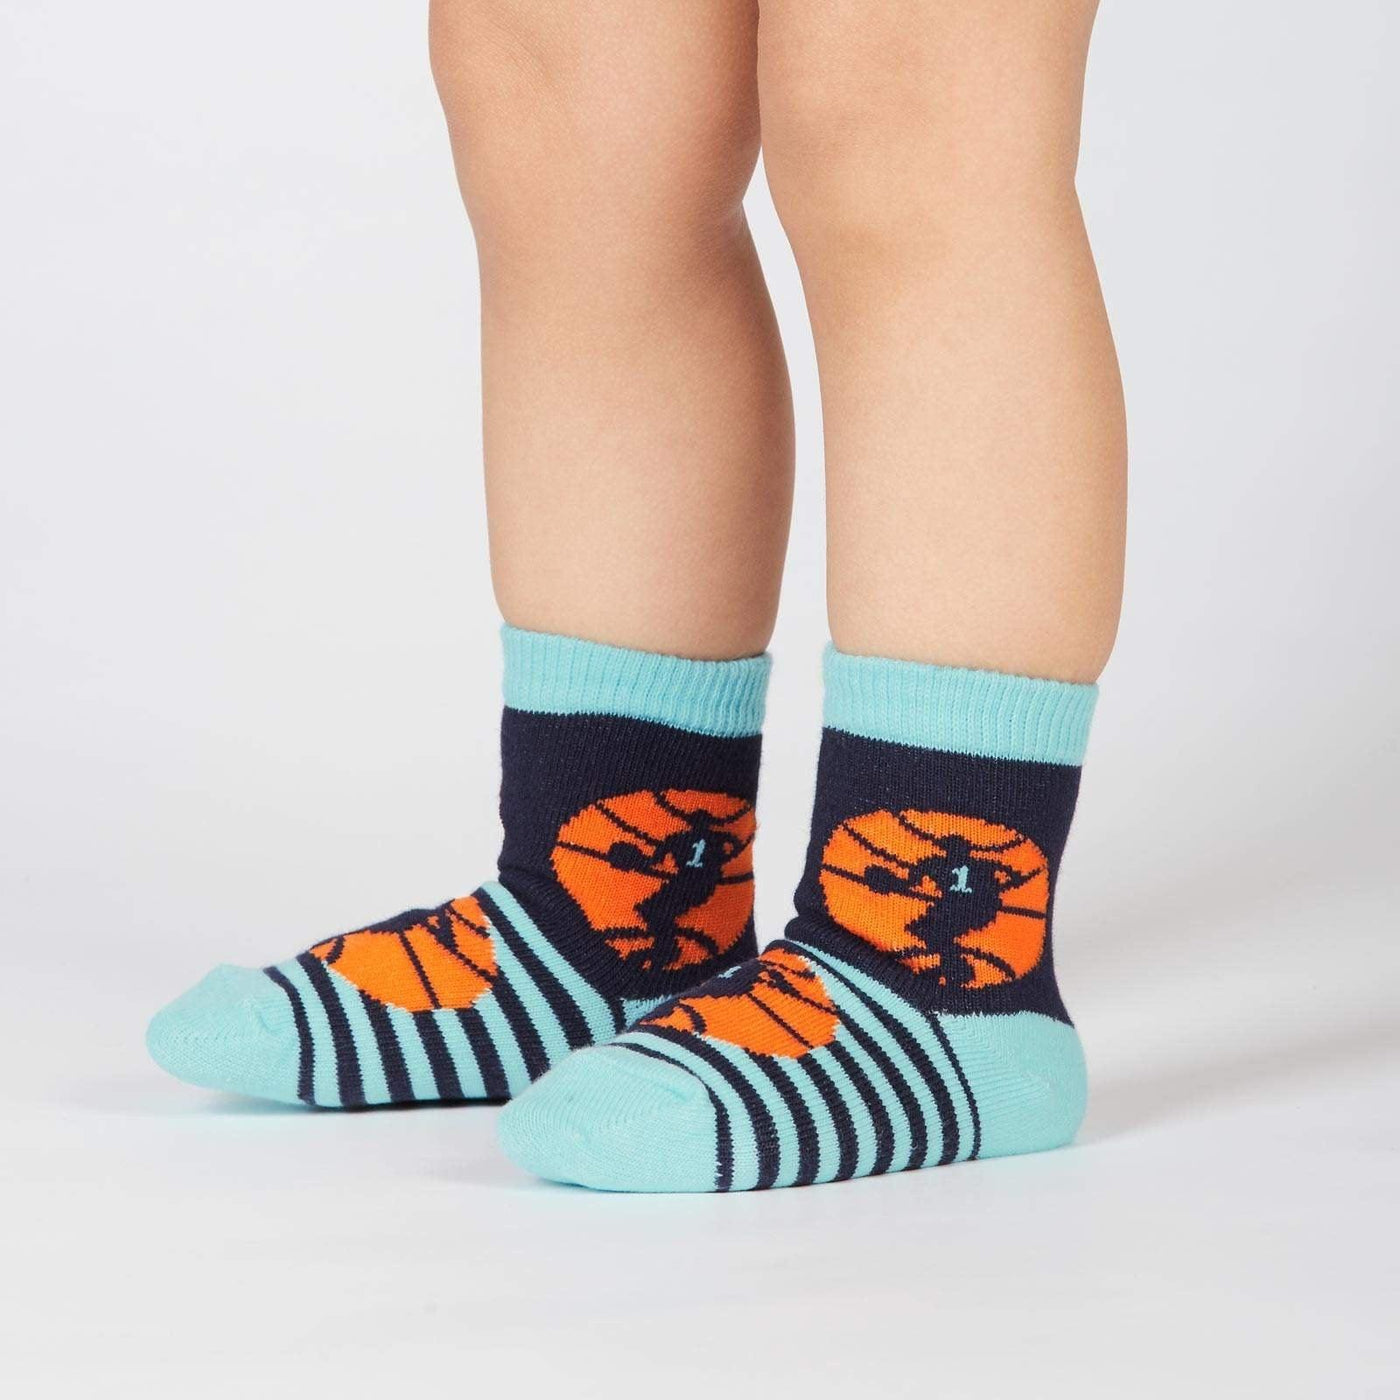 Nothin' But Net, Toddler Crew - Sock It To Me - The Sock Monster